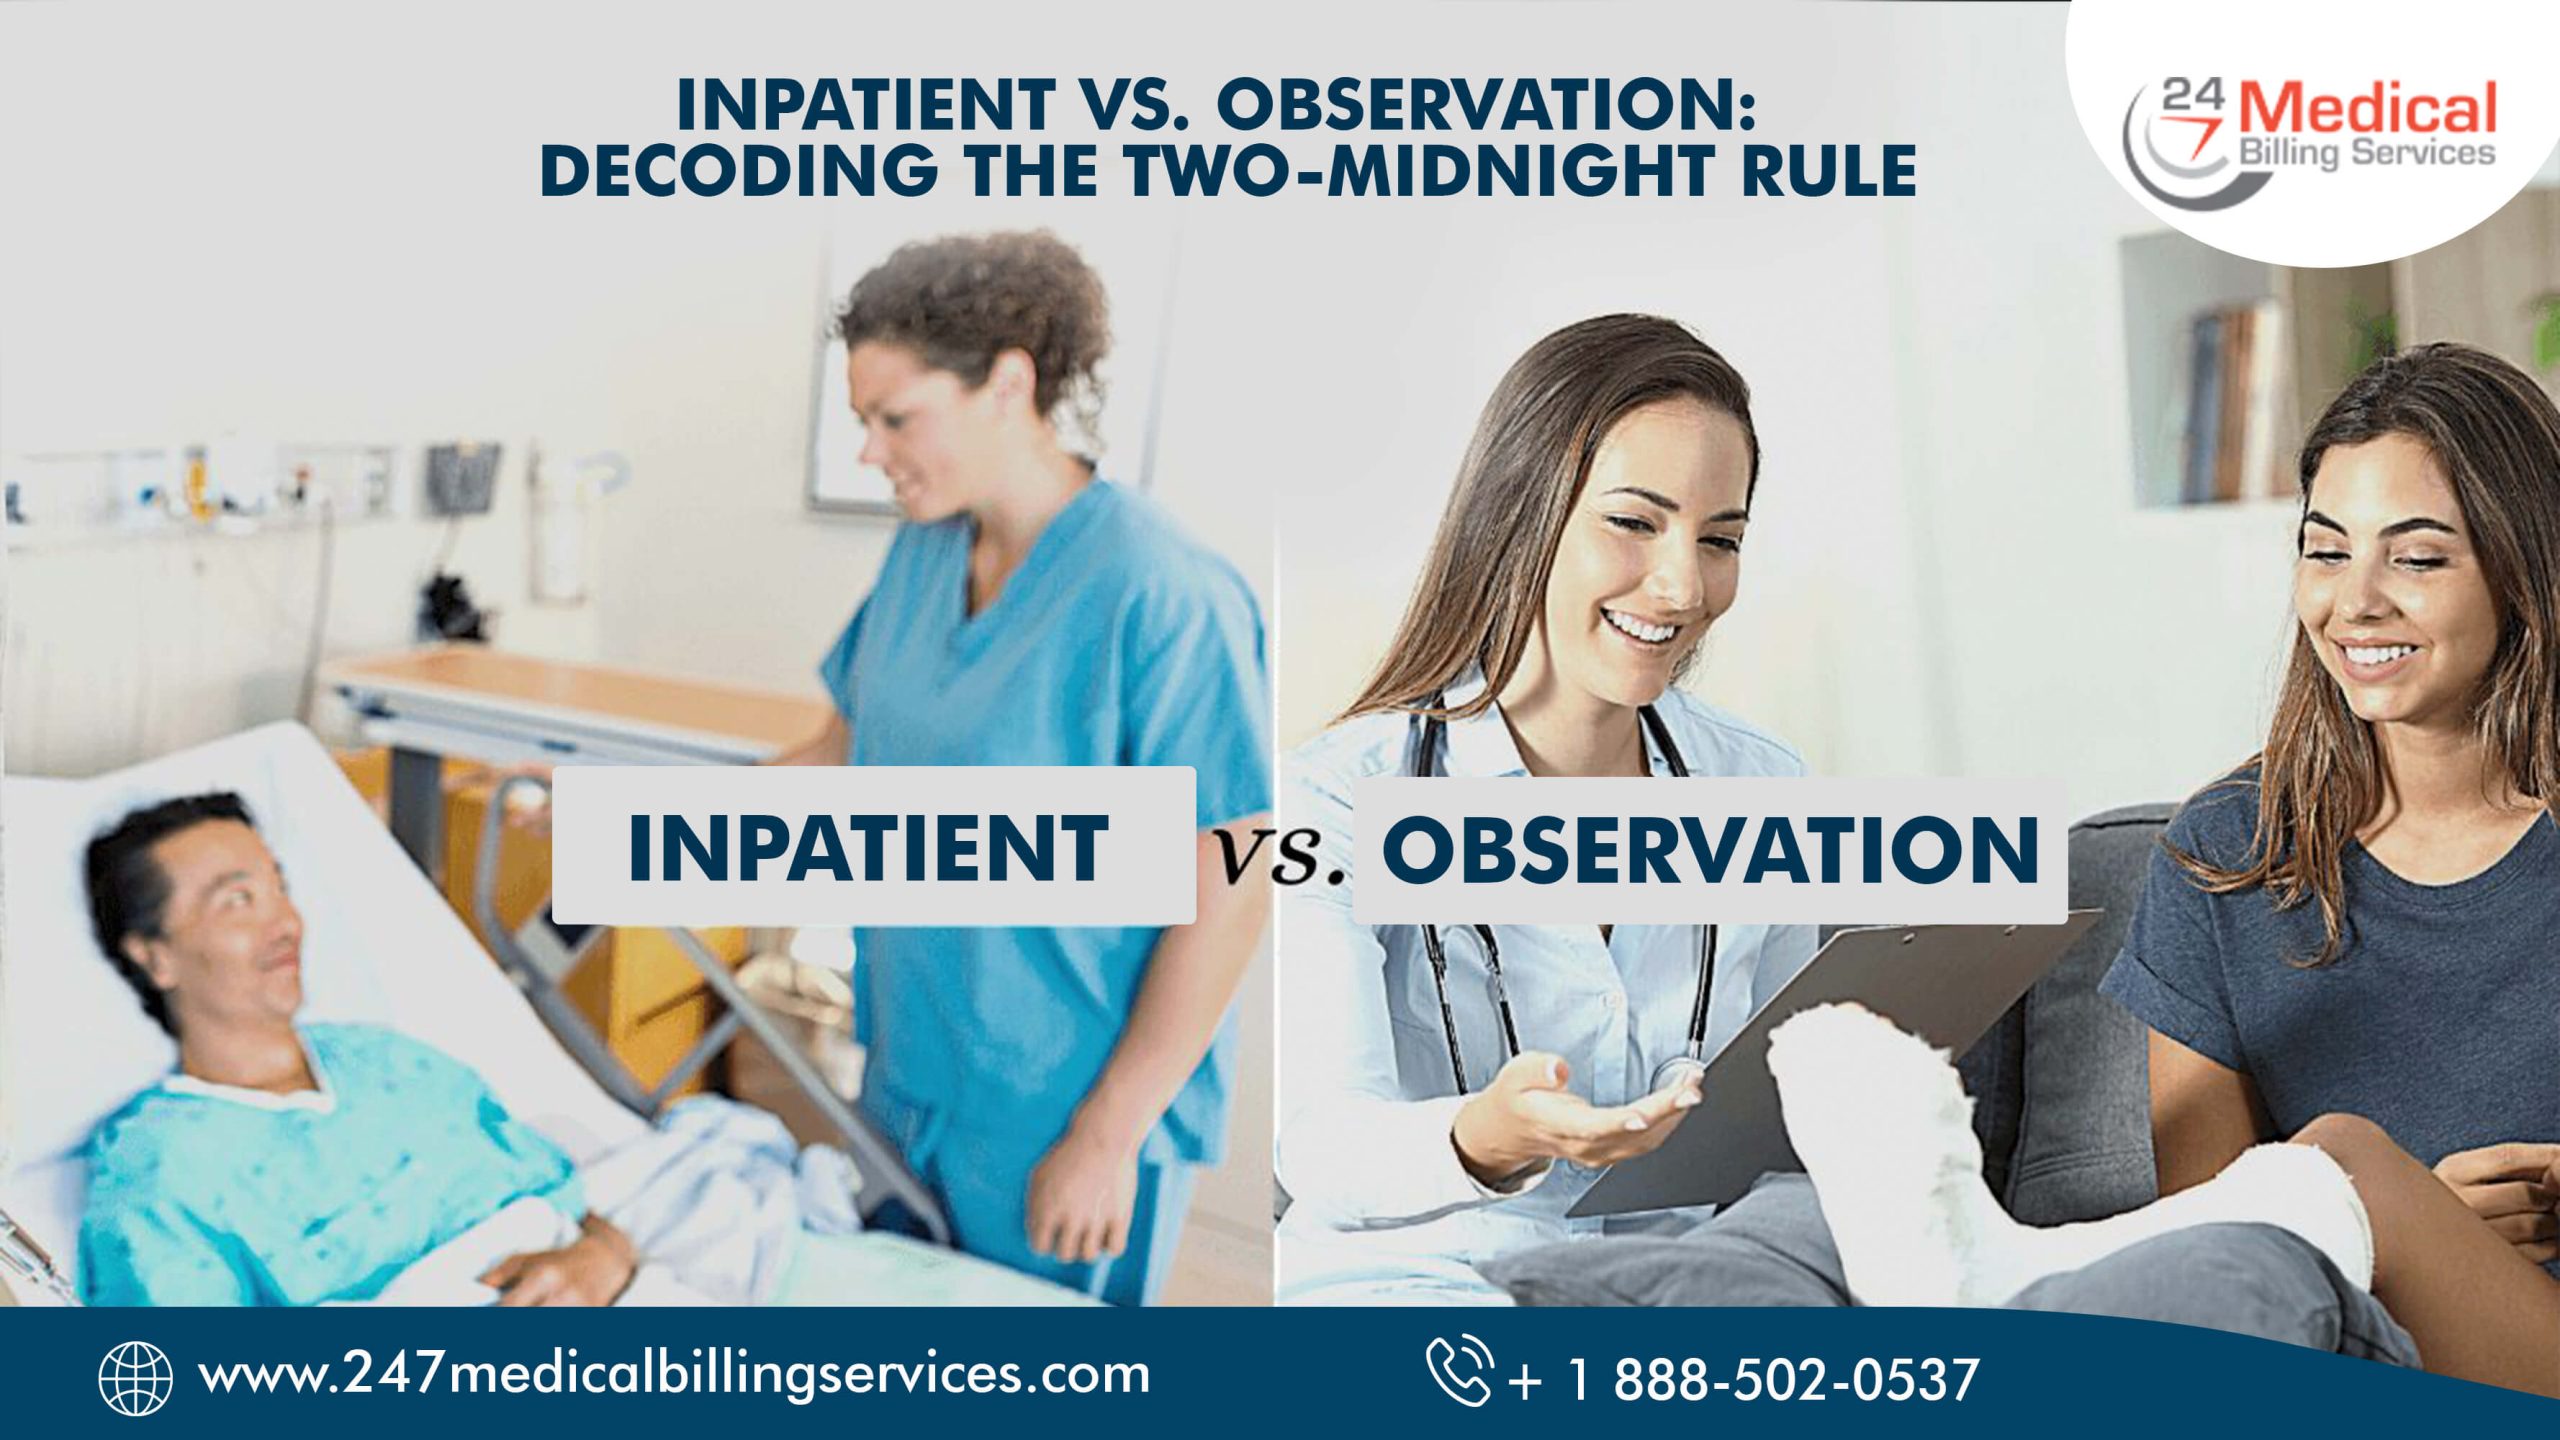 Know the intricacies of the Two-Midnight Rule and the differences between inpatient and observation care with 24/7 Medical Billing Services